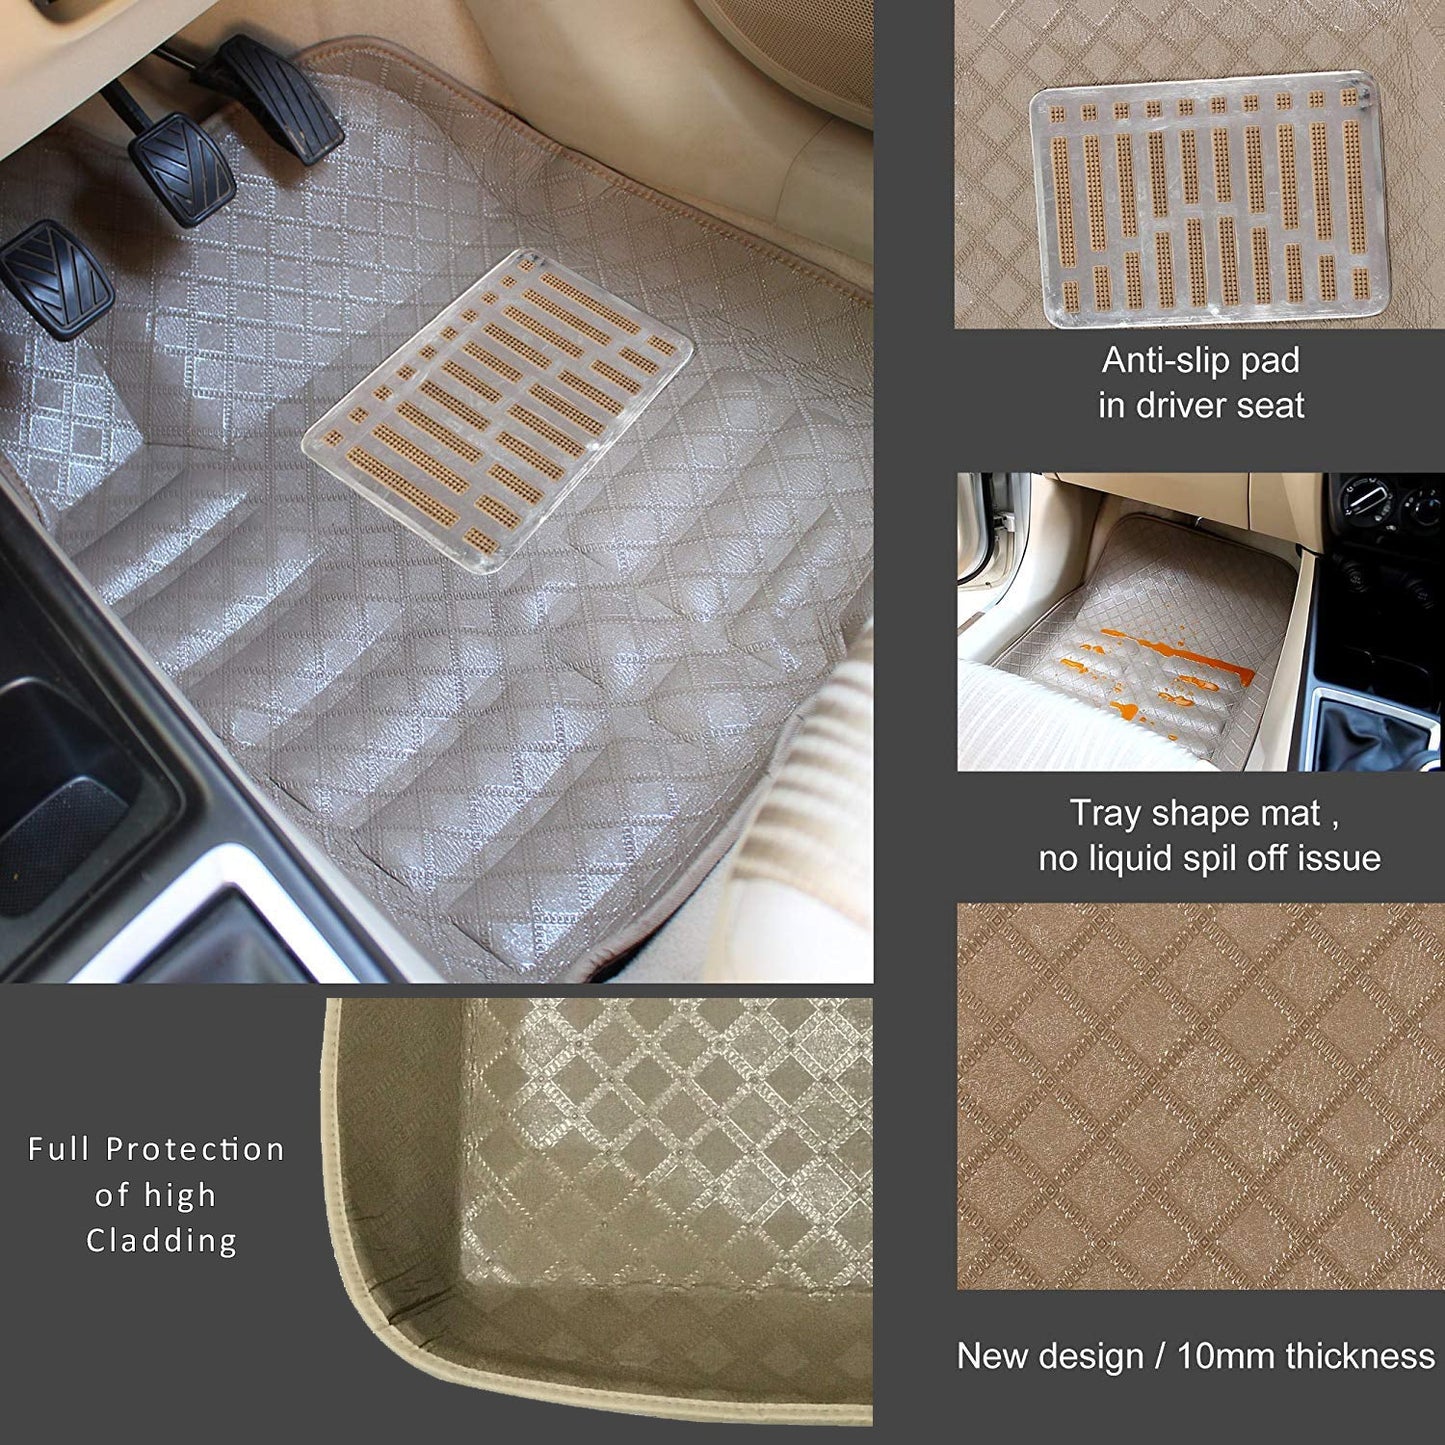 Oshotto 4D Artificial Leather Car Floor Mats For Toyota Fortuner New - Set of 5 (Complete Mat with 3rd Row and Dicky) - Beige